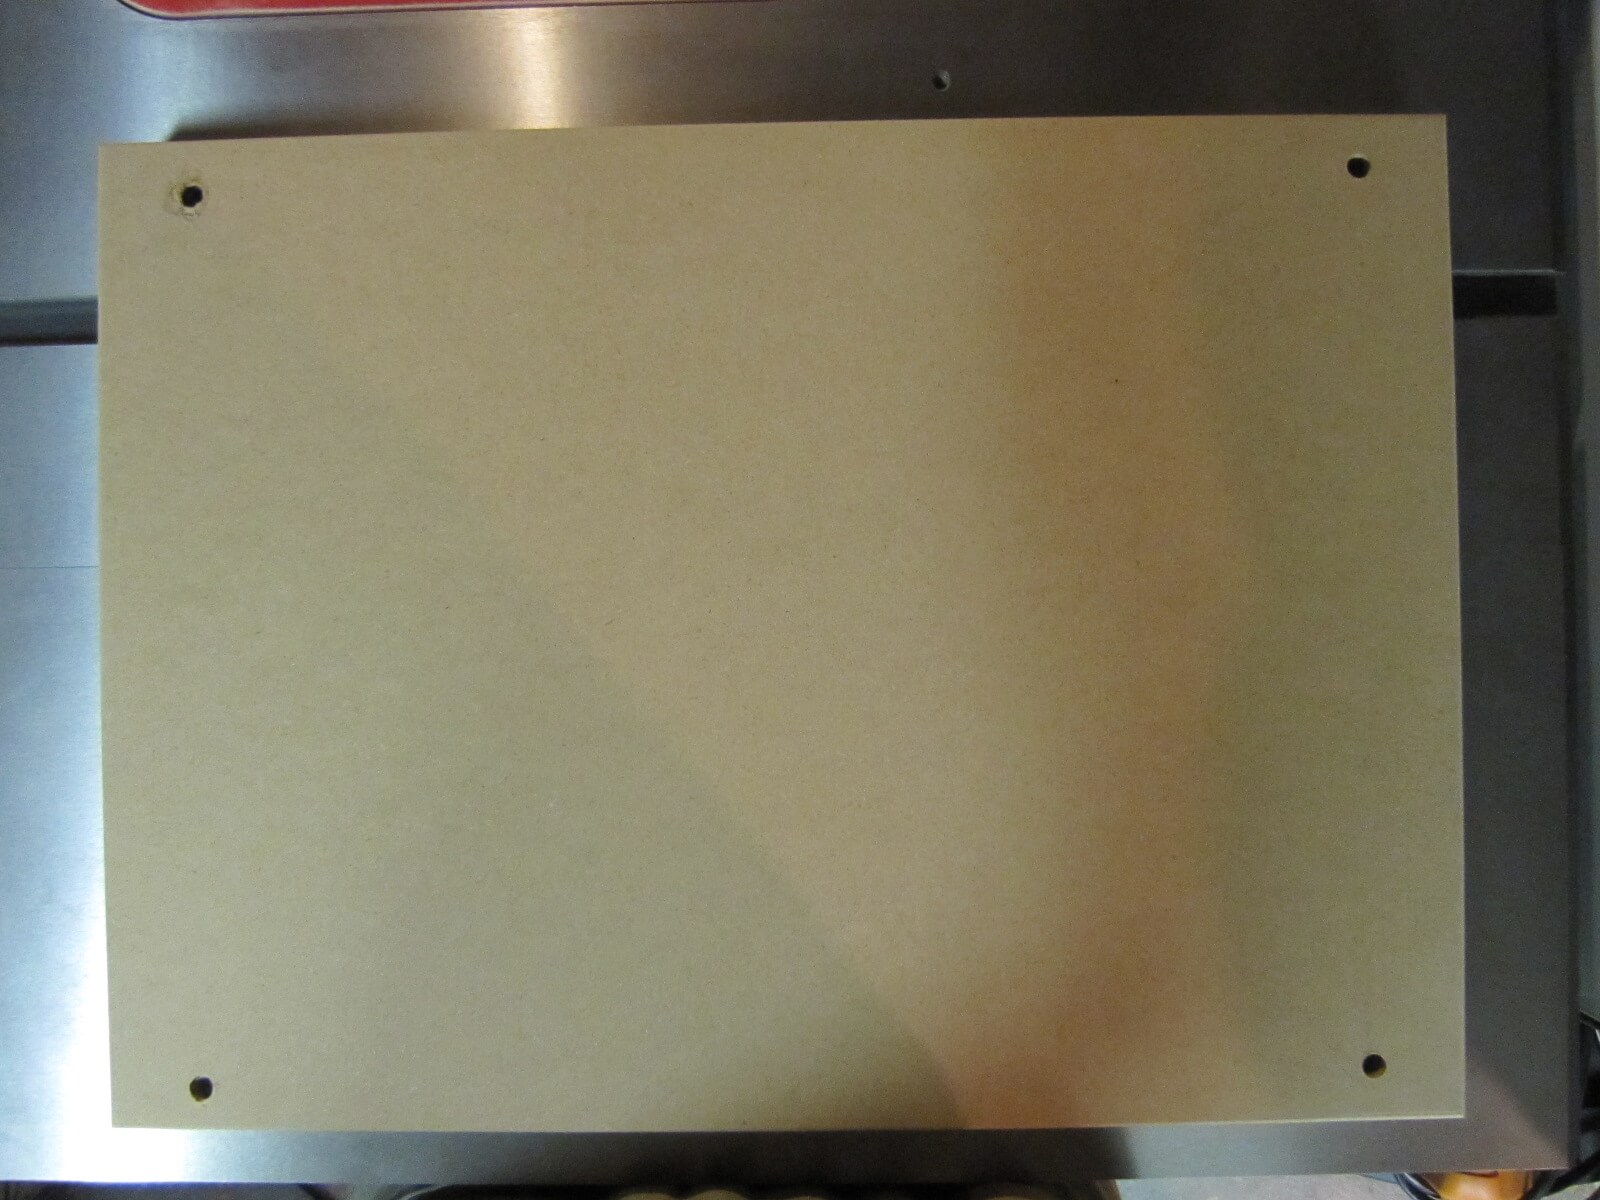 The drilled MDF surface